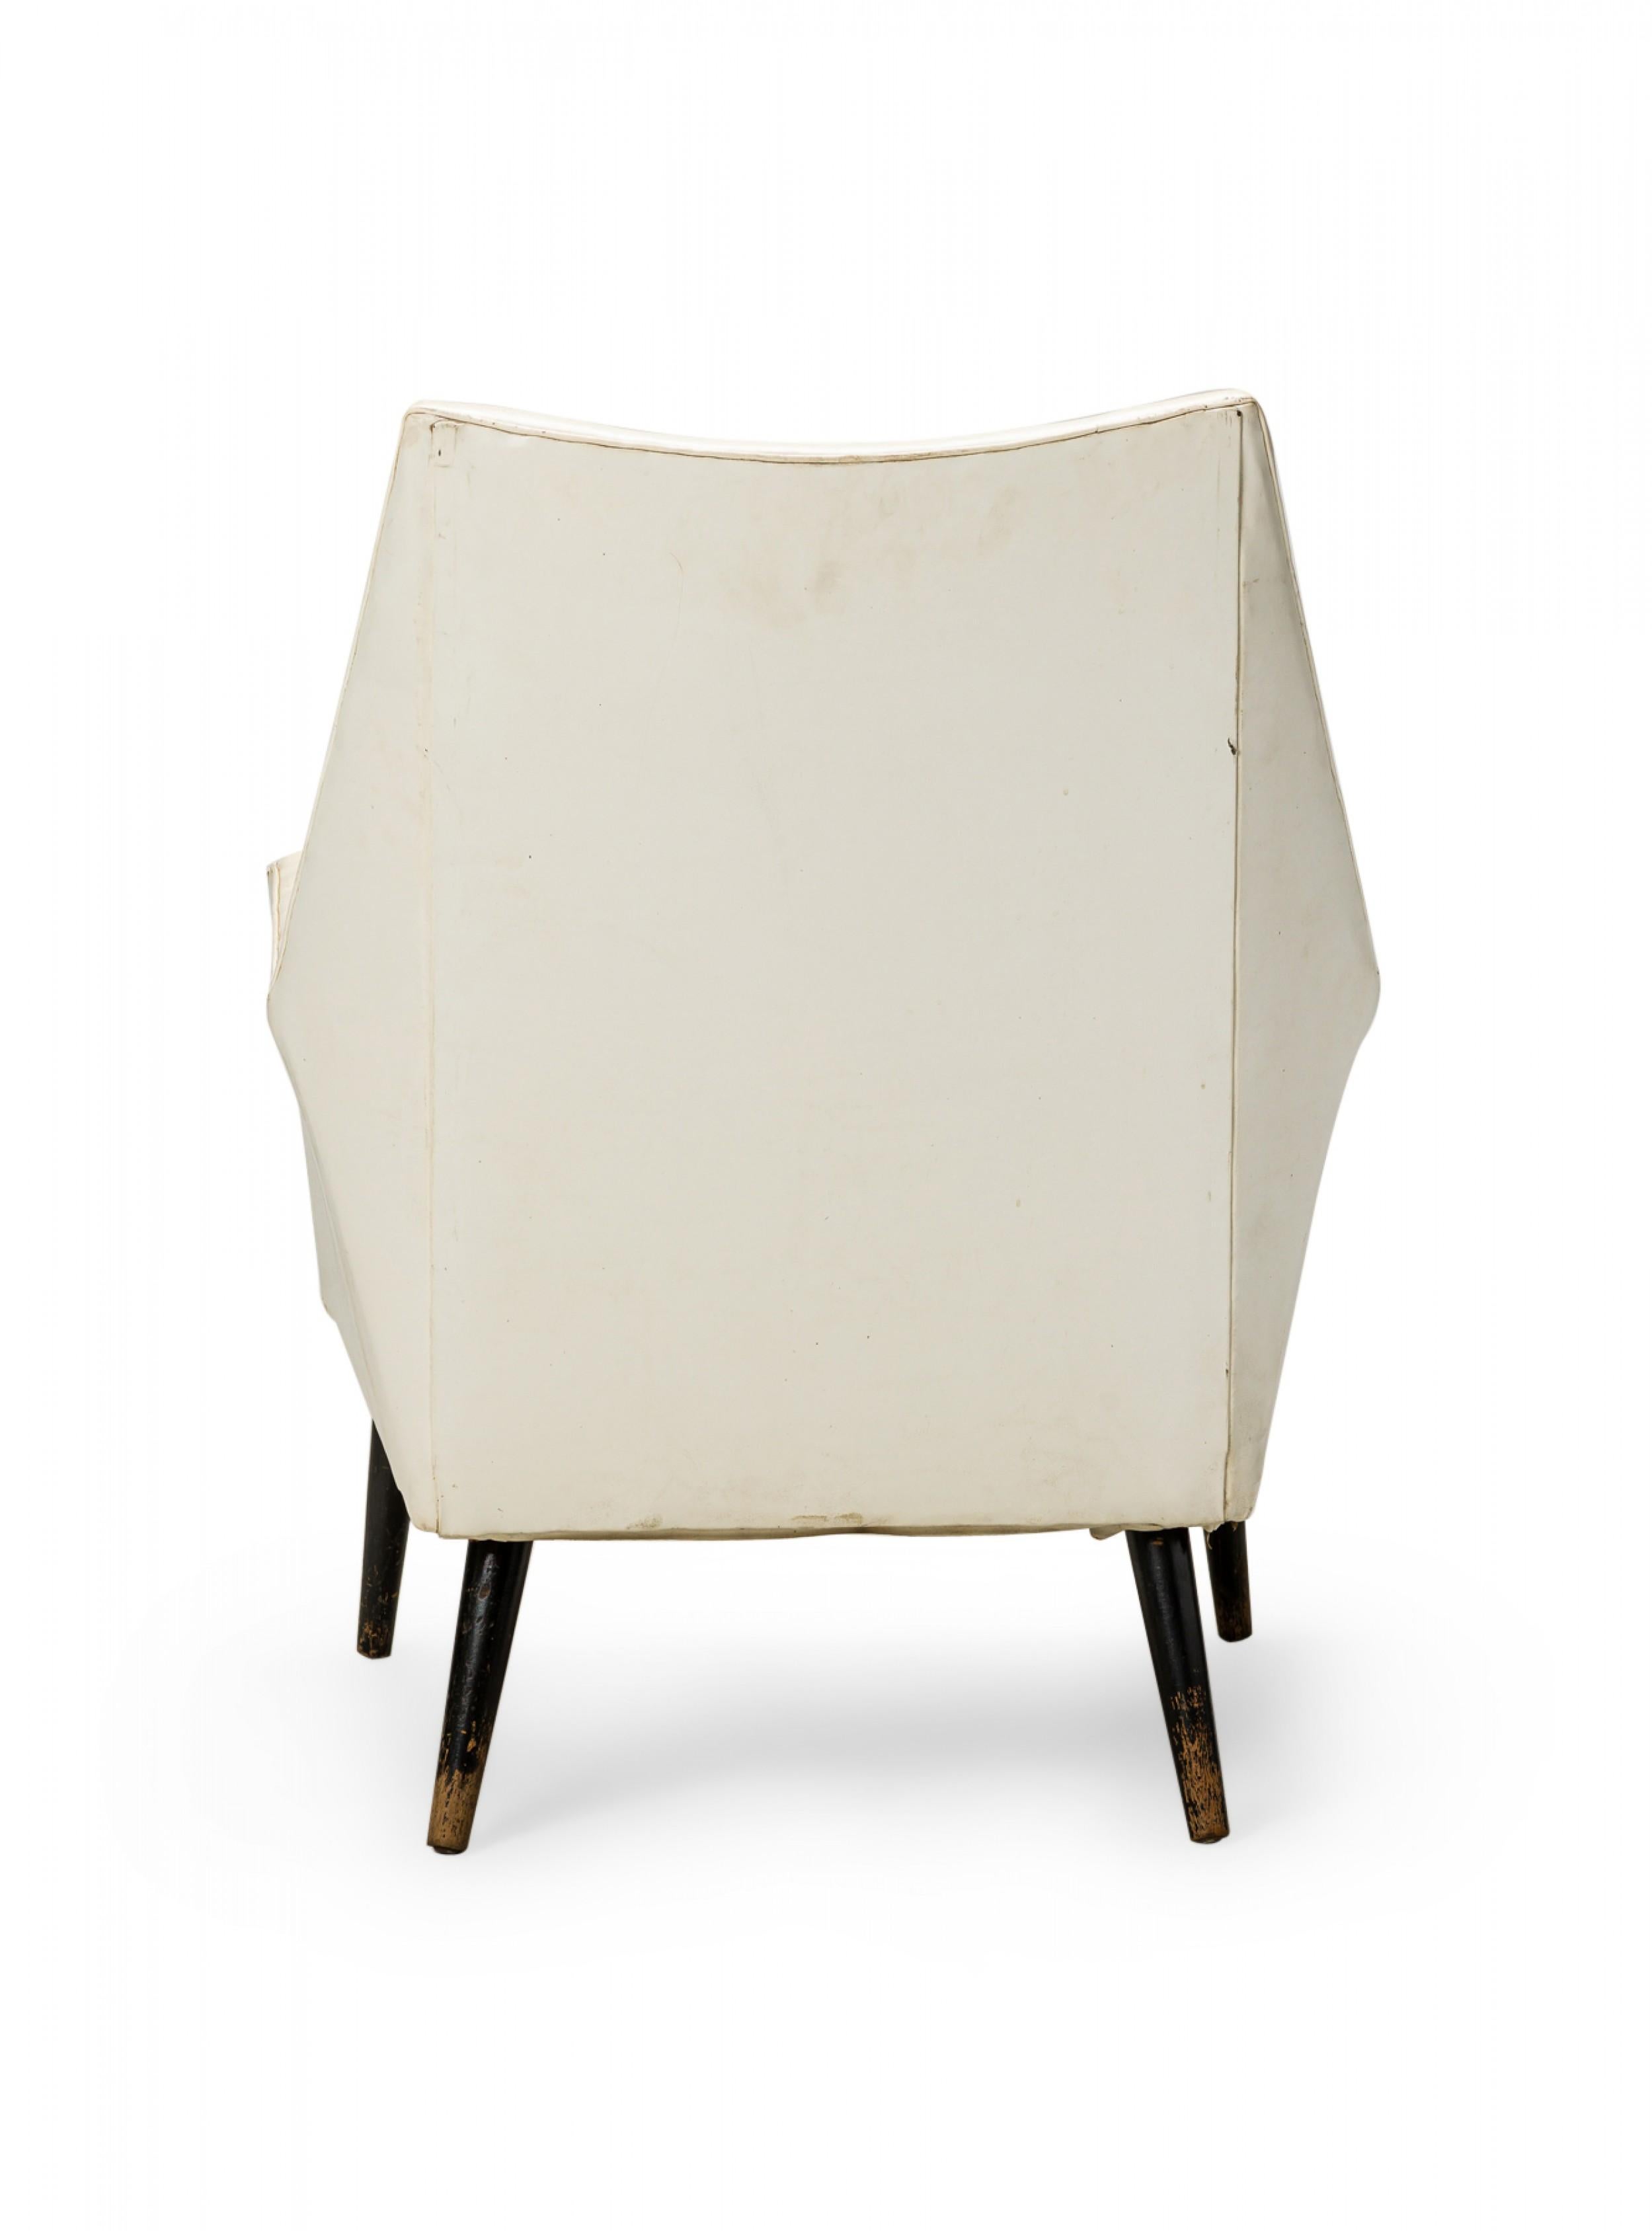 Paul McCobb for Custom Craft Inc. White Leather Lounge Armchair In Good Condition For Sale In New York, NY